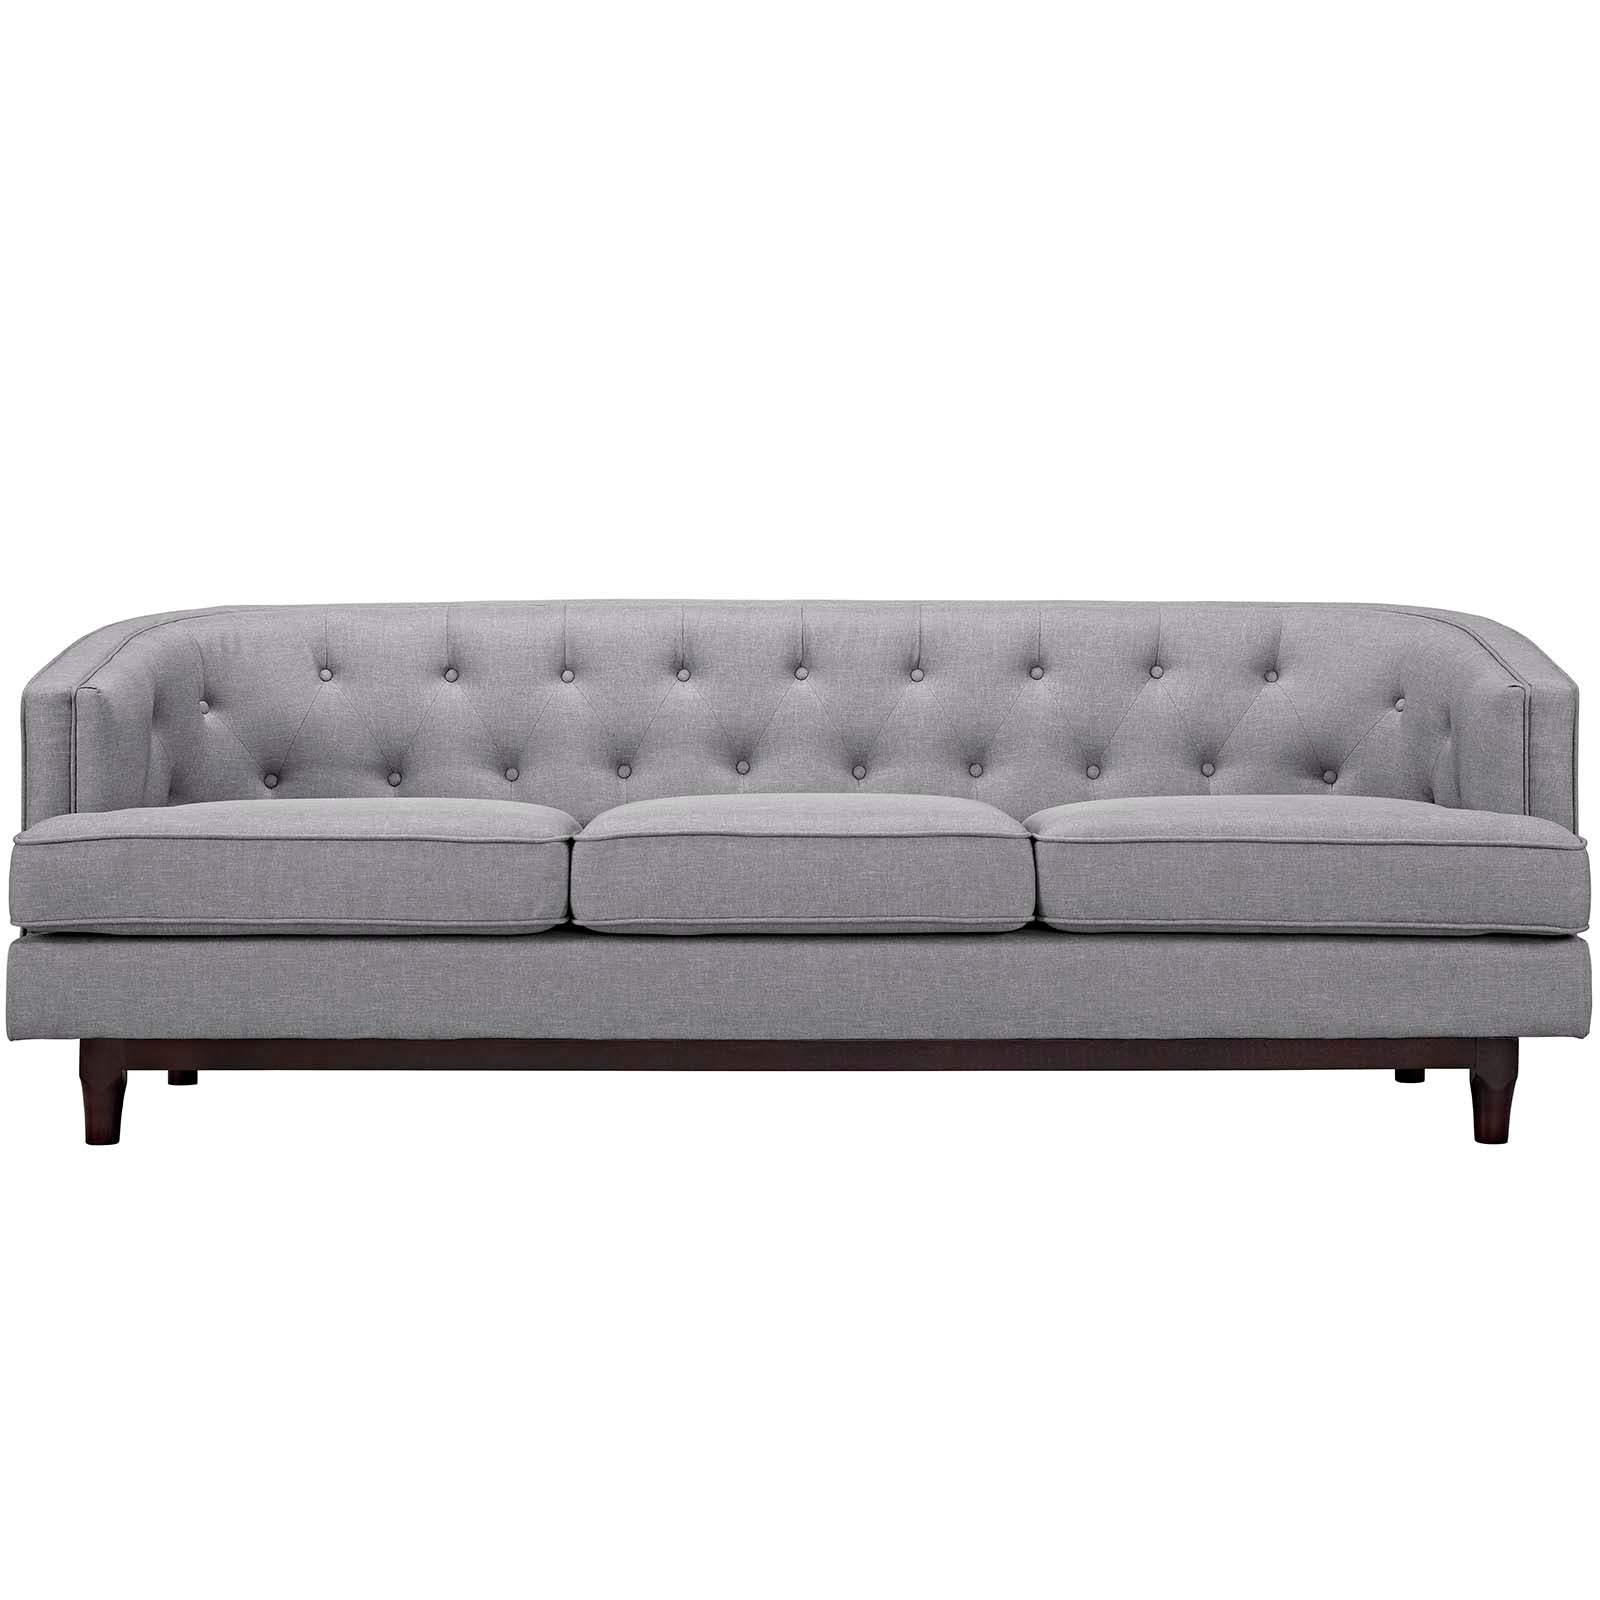 Modway Sofas & Couches - Coast Upholstered Fabric Sofa Light Gray